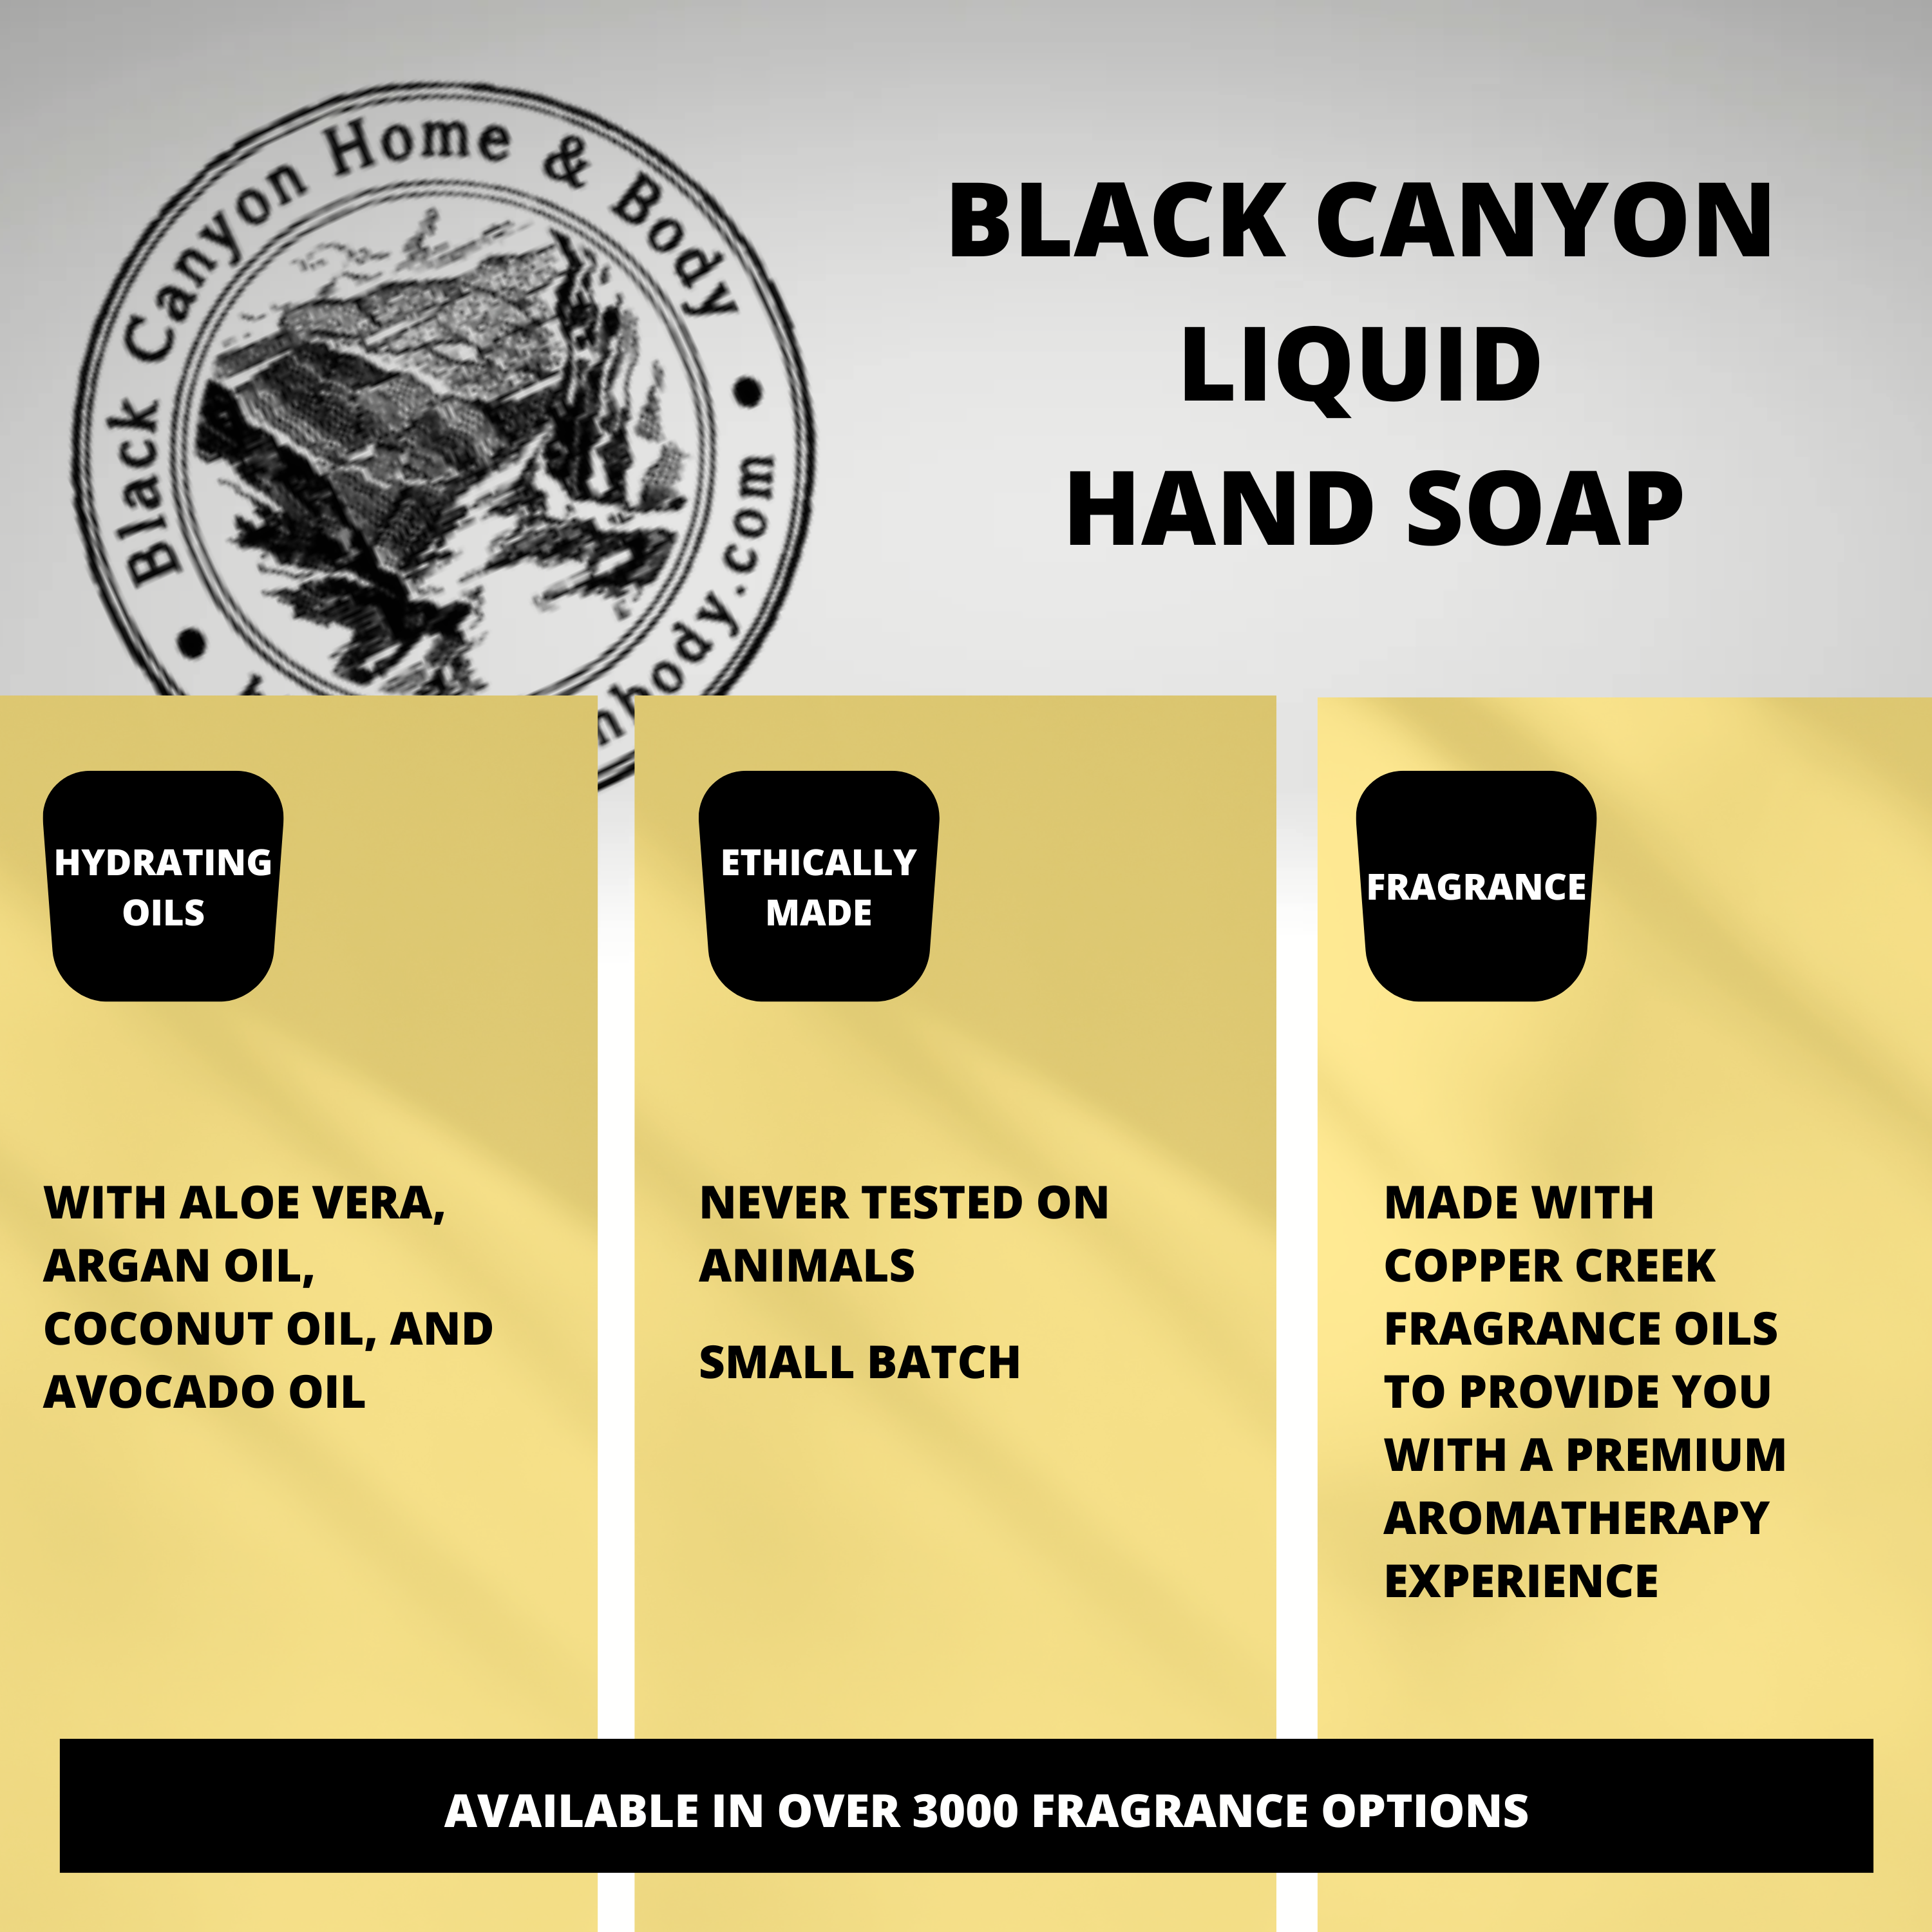 Black Canyon Currant & Amber Scented Liquid Hand Soap